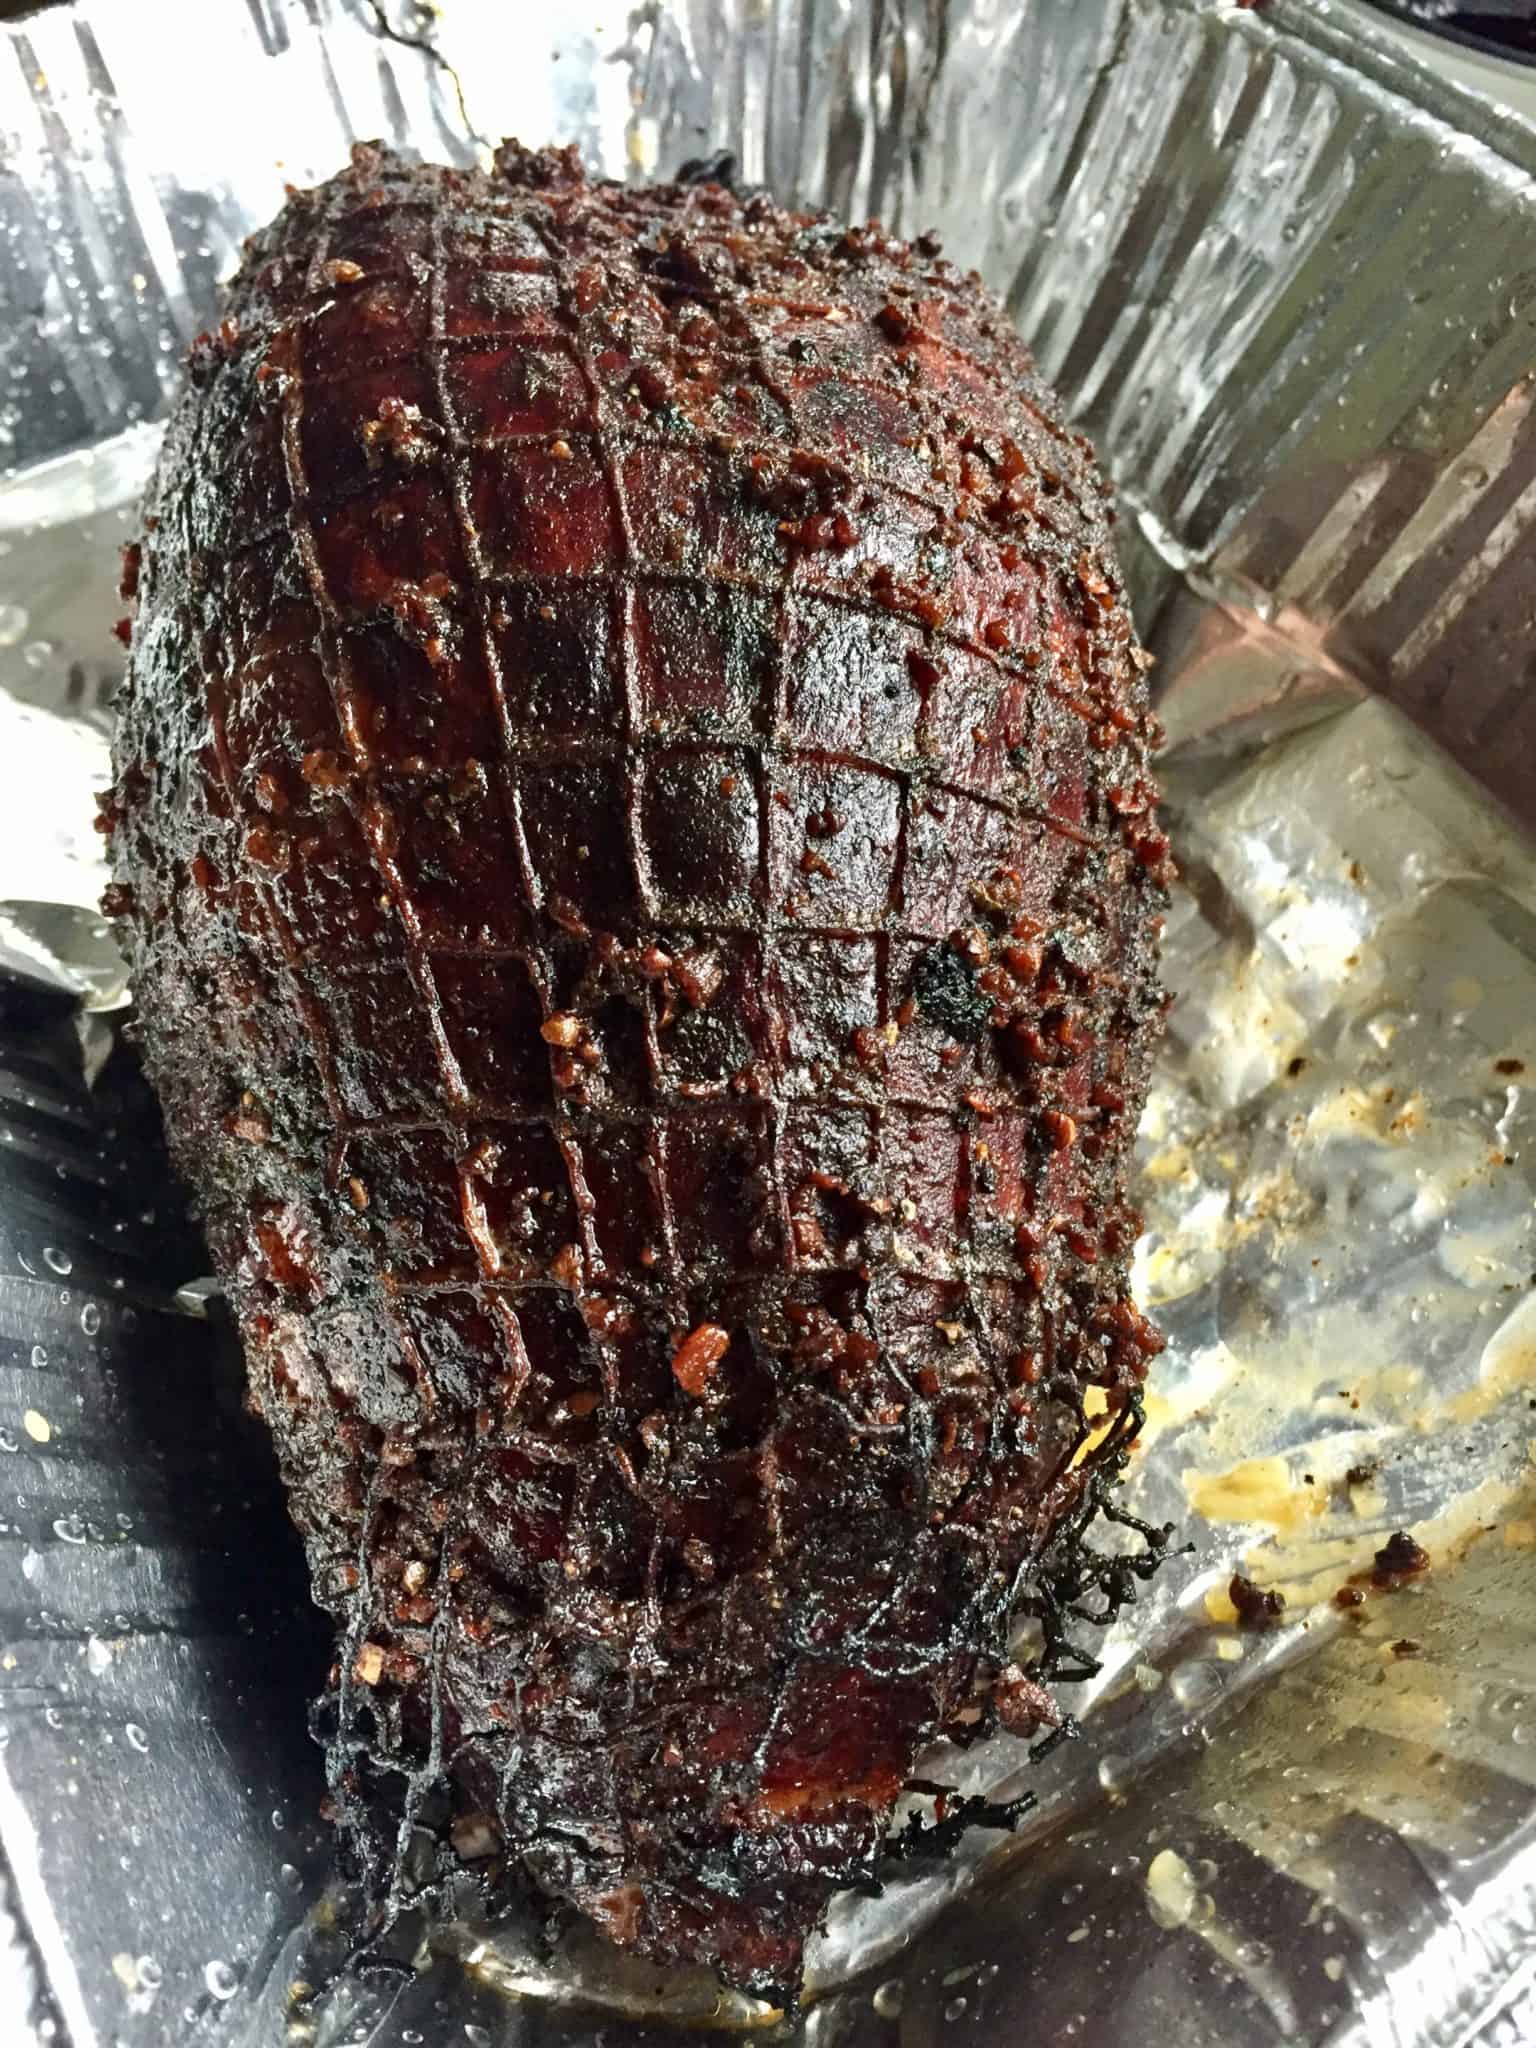 easy double smoked turkey whole in foil pan close up view